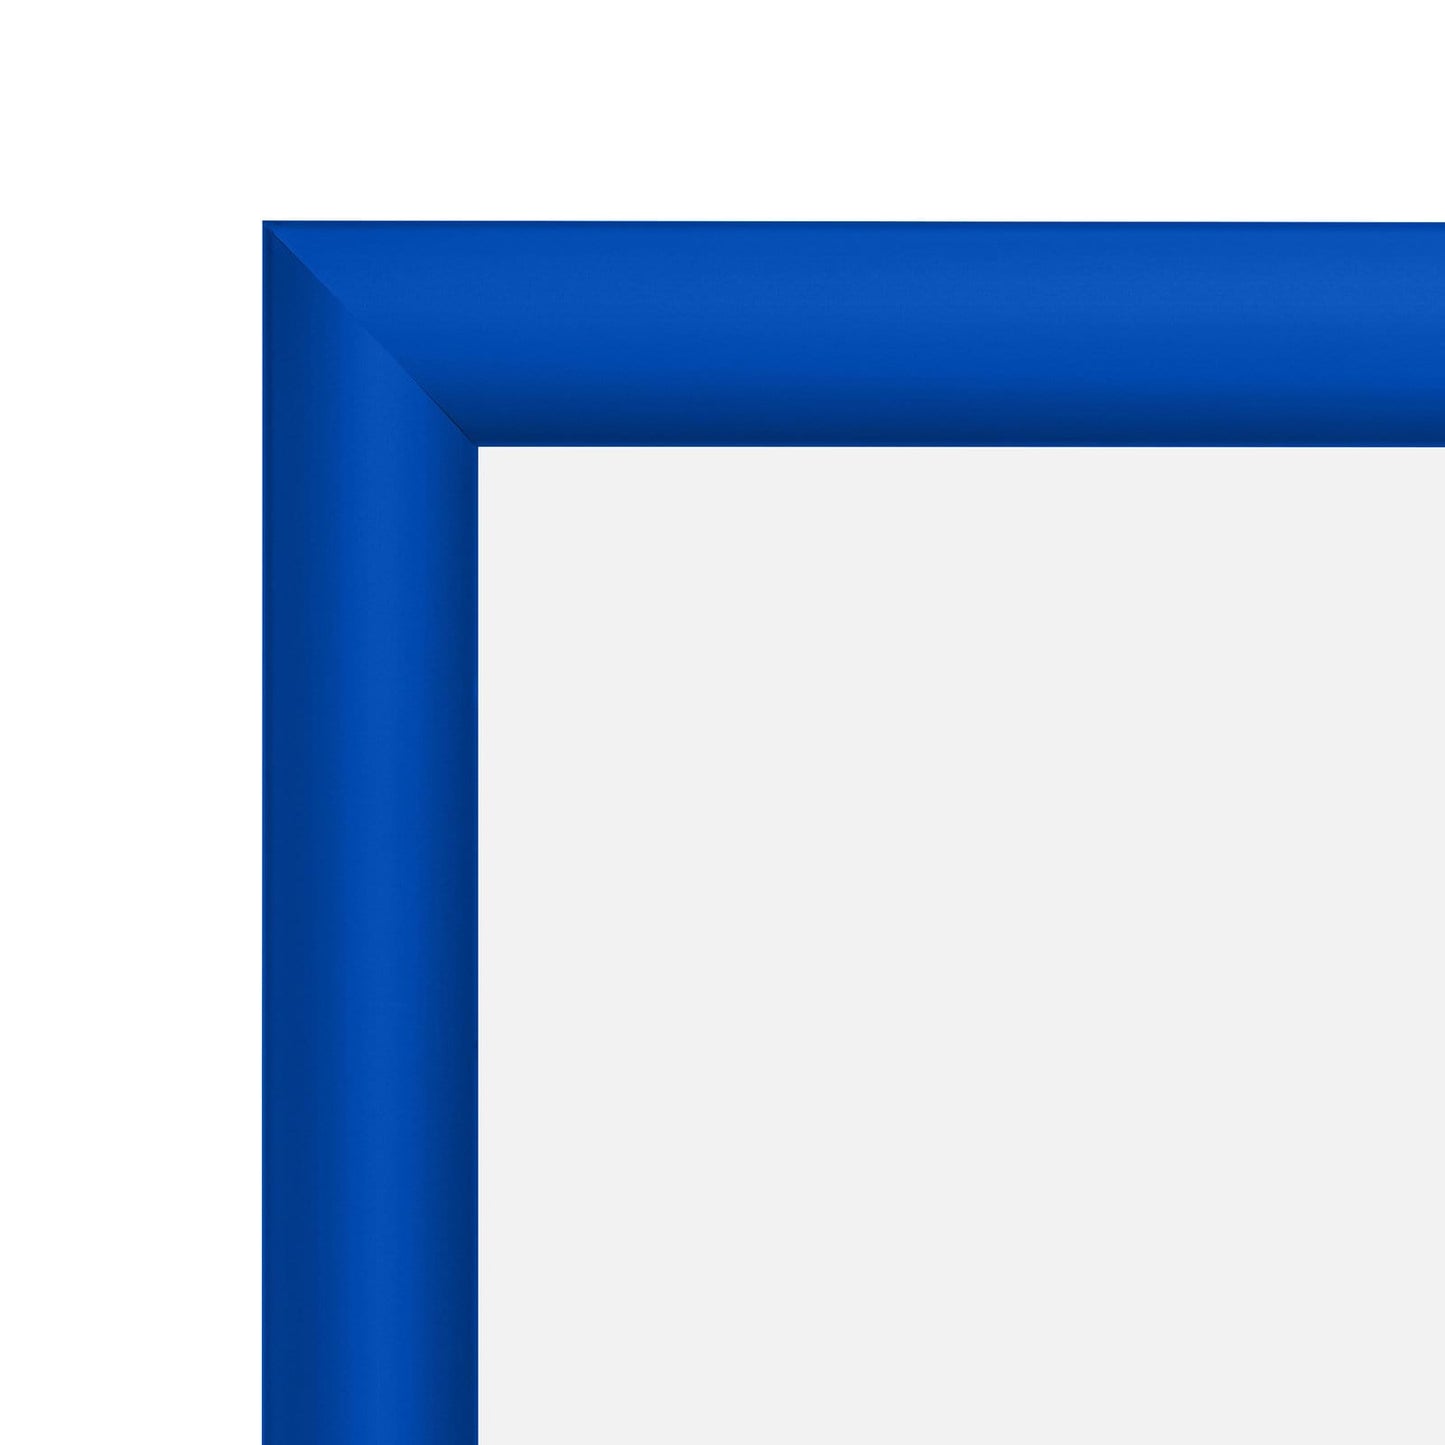 22x56 Blue SnapeZo® Snap Frame - 1.7" Profile - Snap Frames Direct